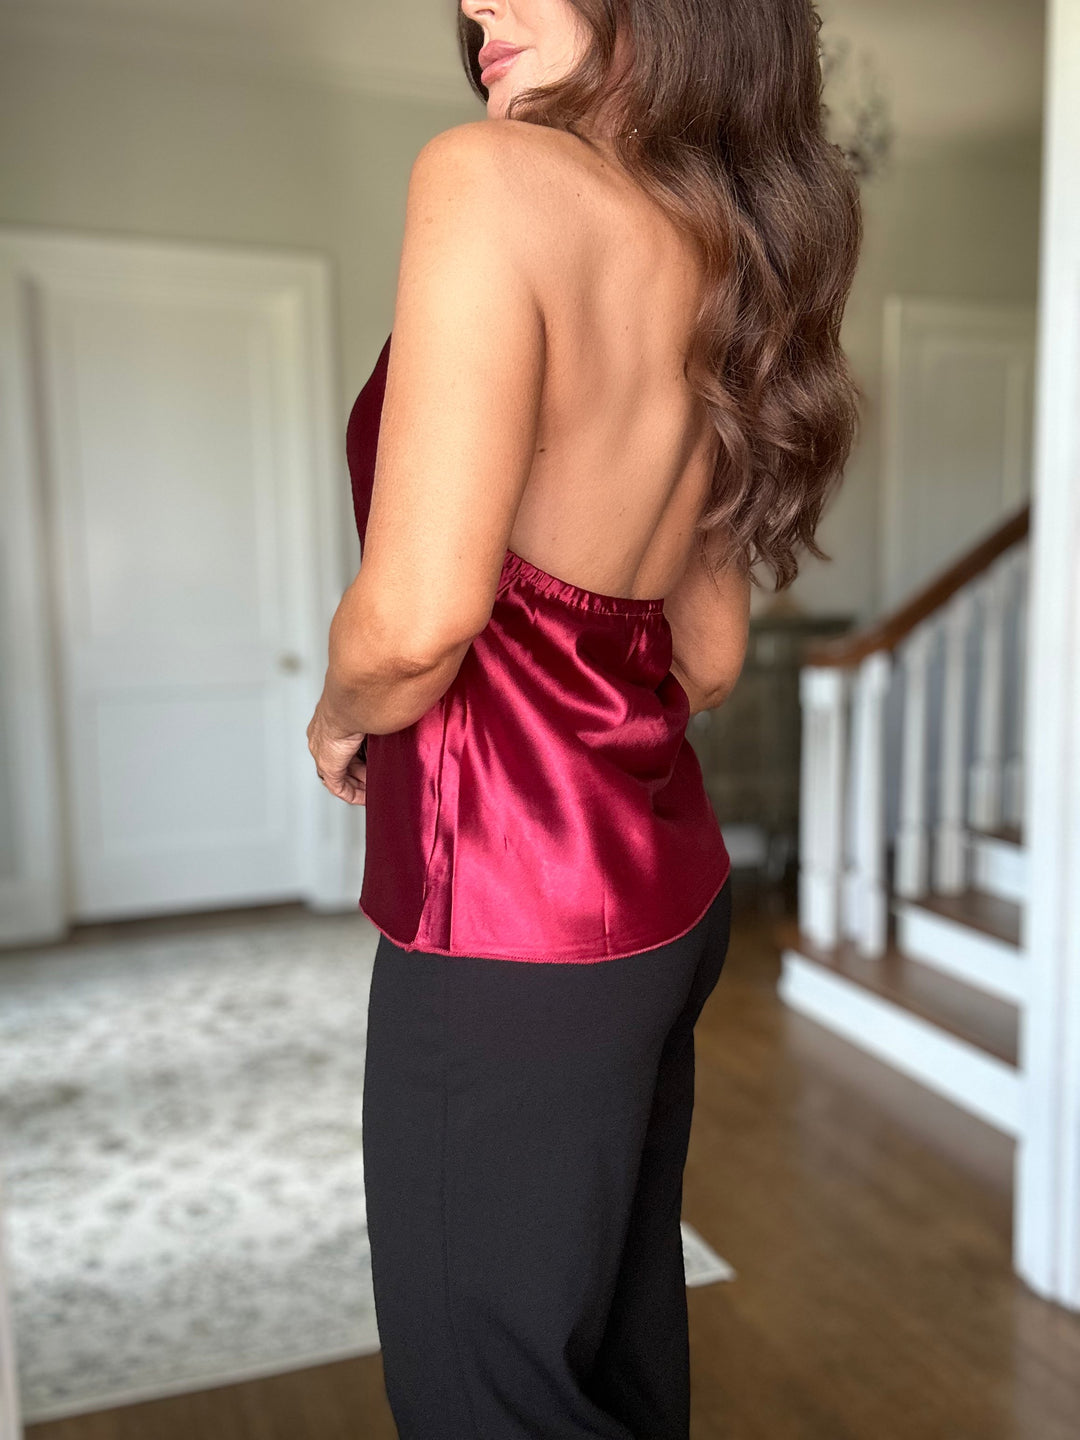 Shae burgundy wine satin open back chain later top